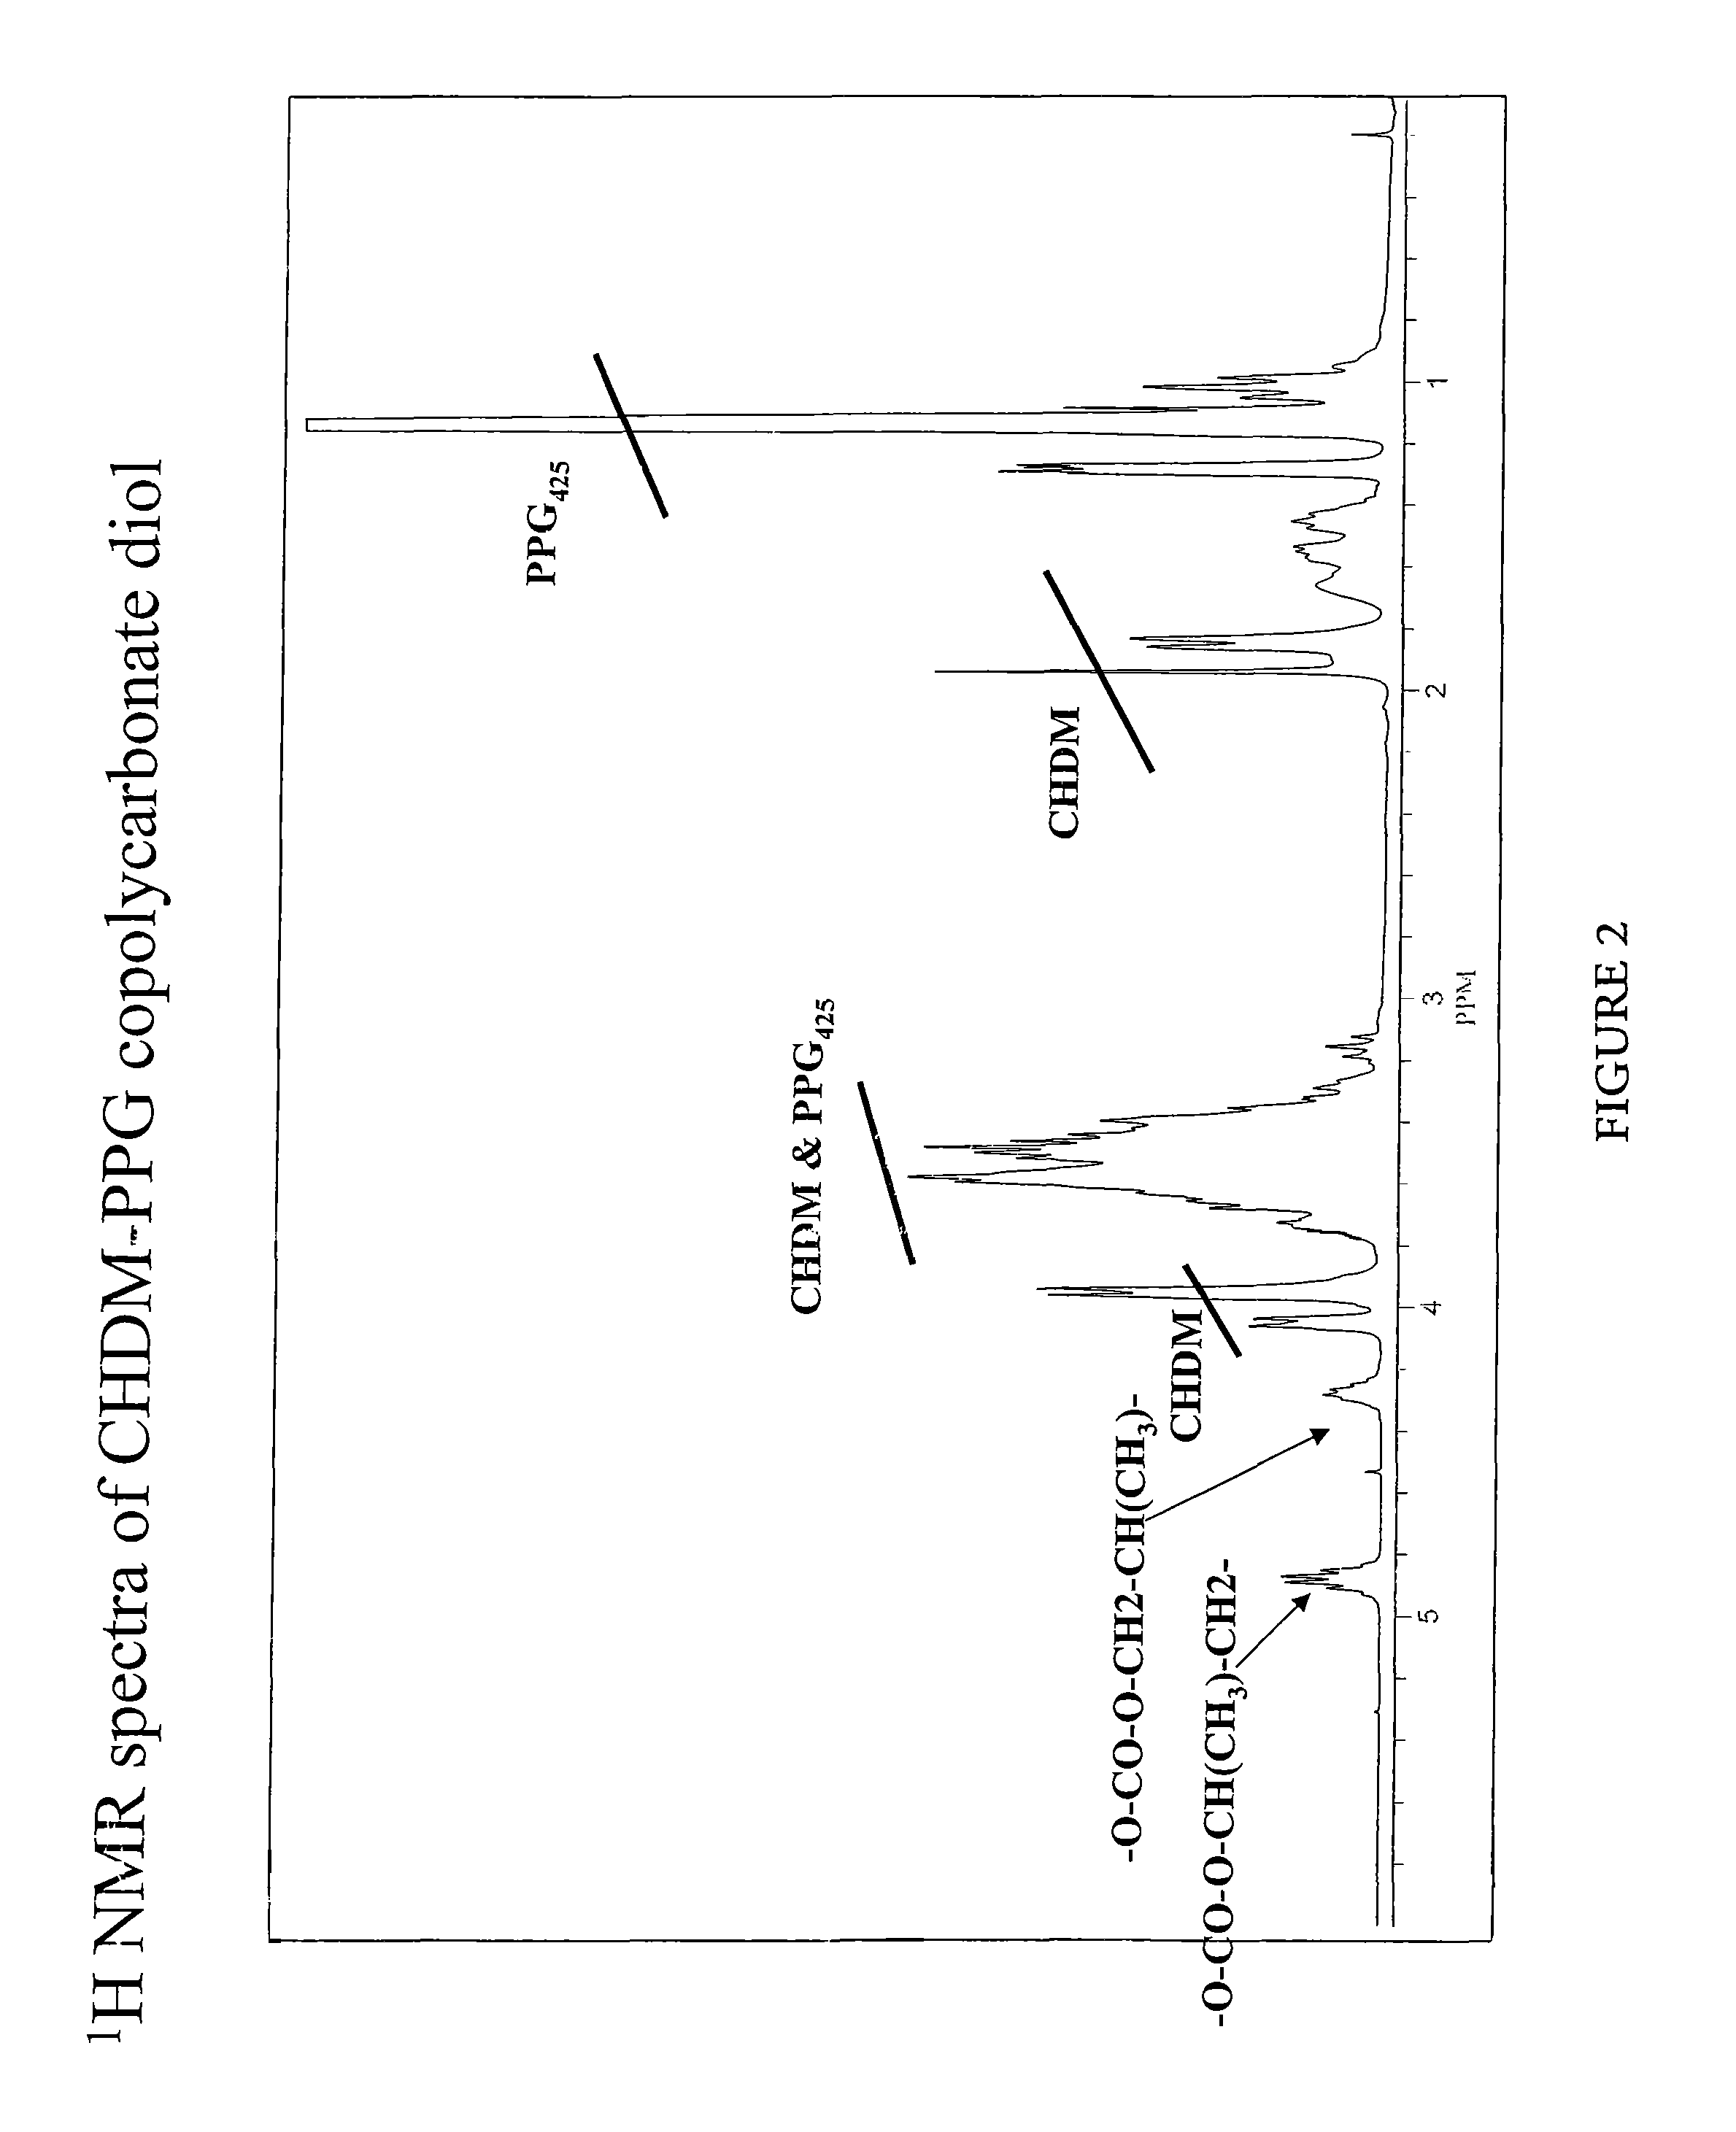 Copolycarbonates, their derivatives and the use thereof in silicone hardcoat compositions